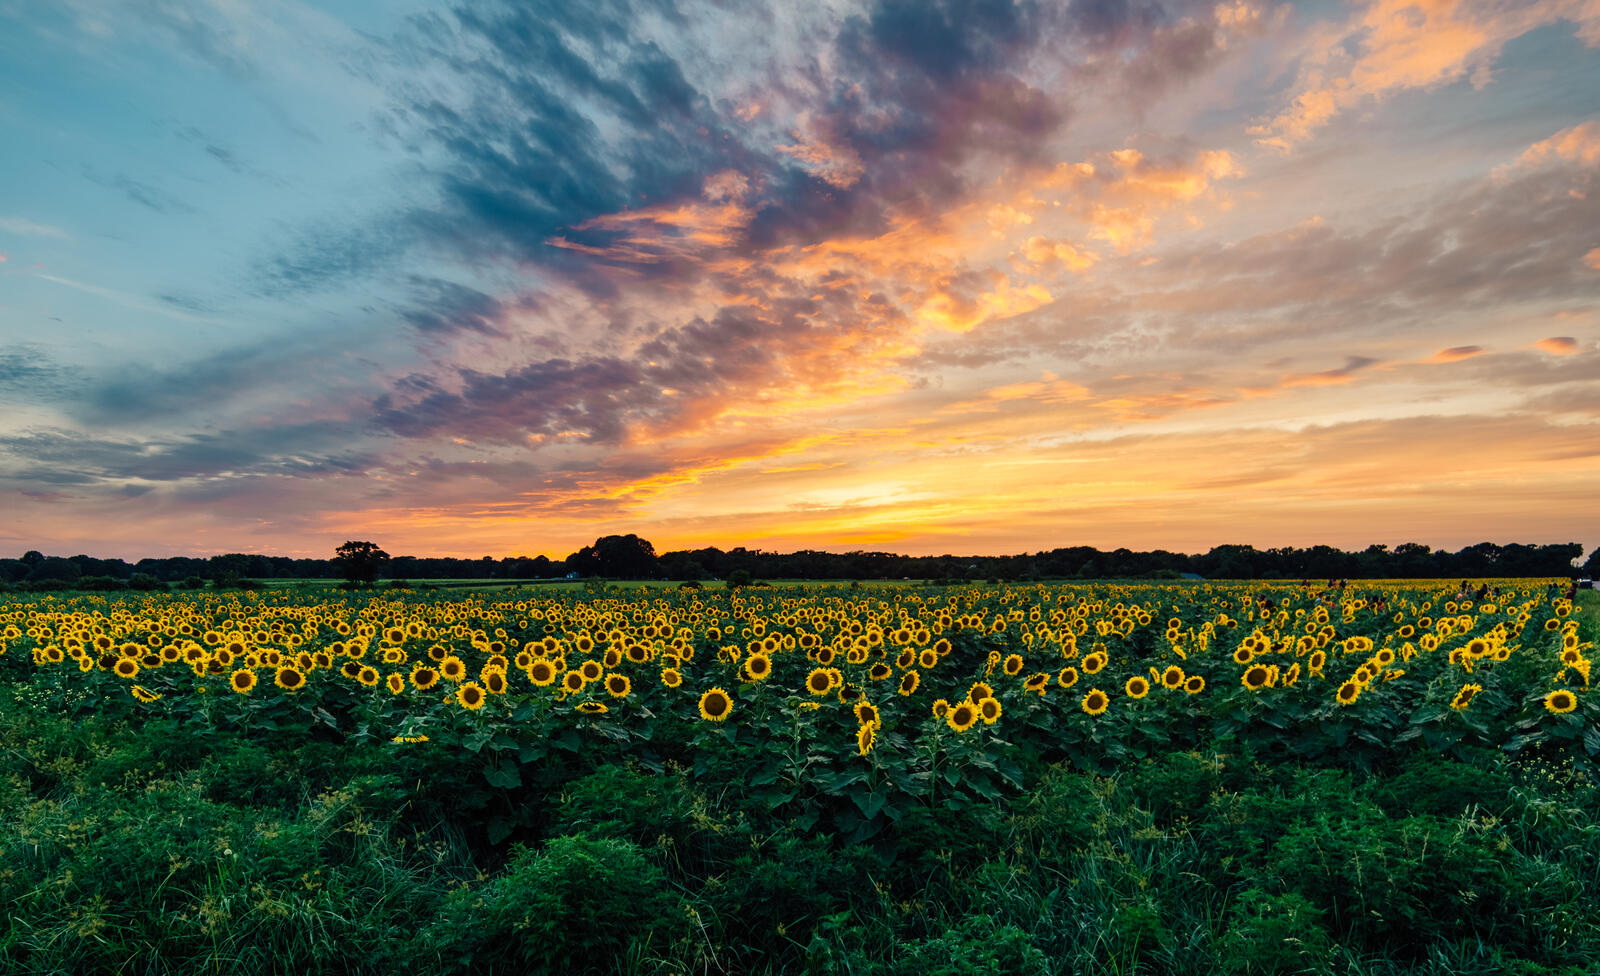 Wallpapers nature sunflowers sunset on the desktop